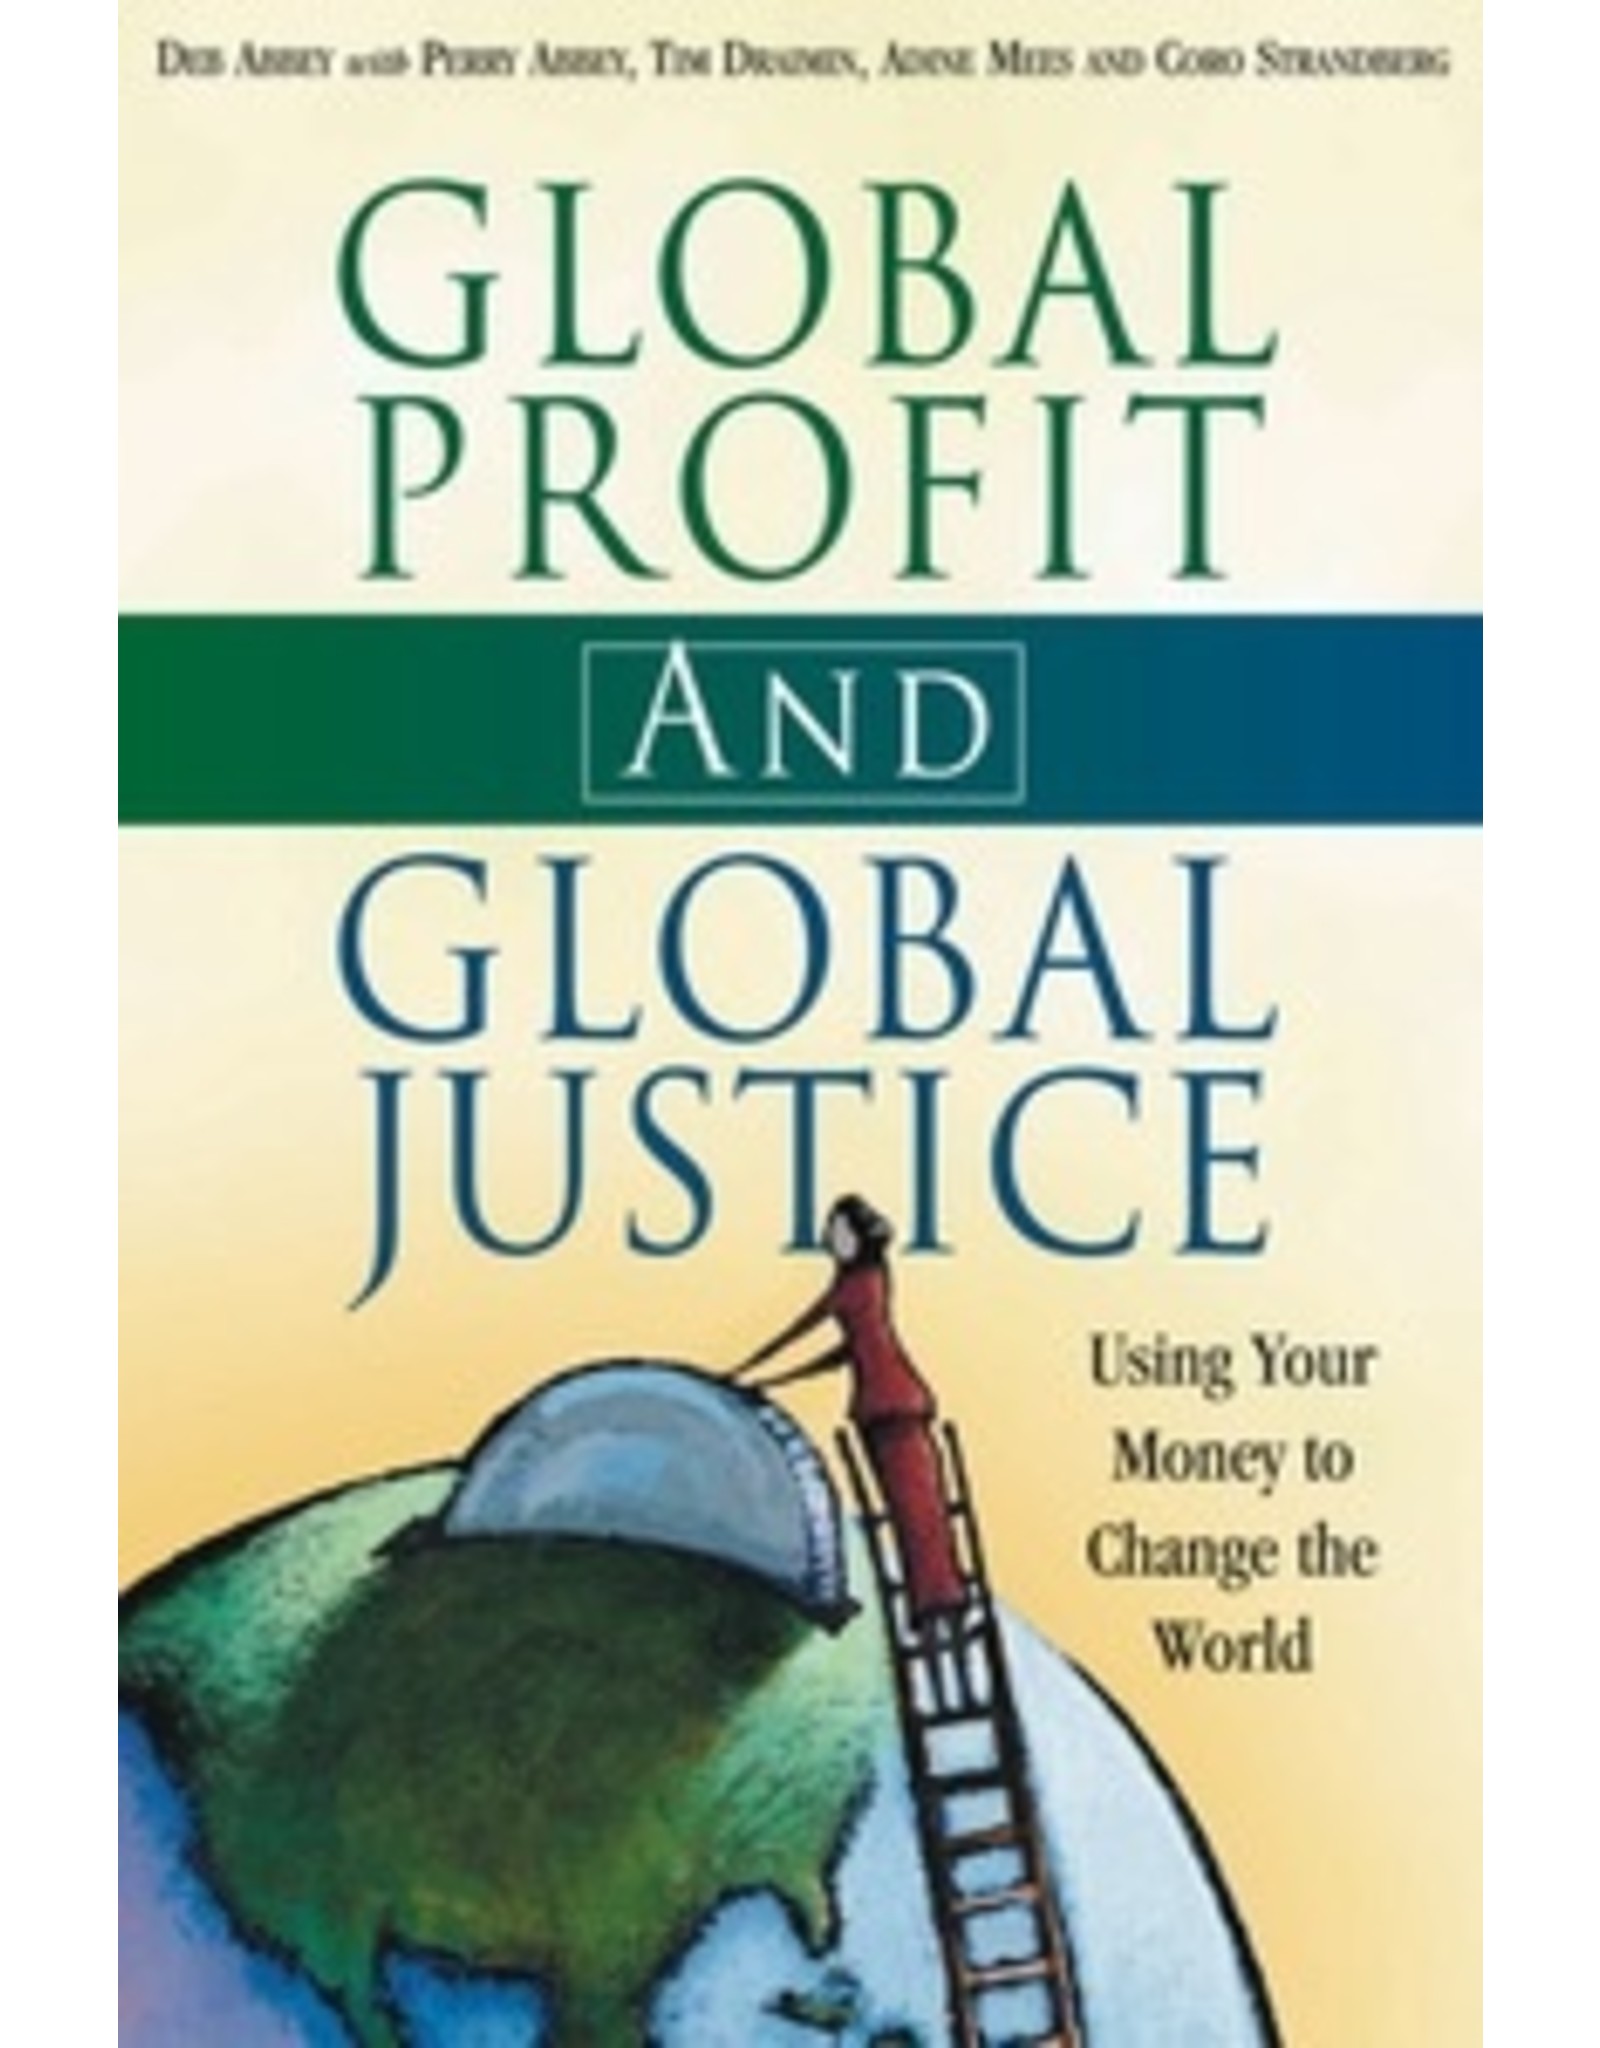 Literature Global Profit and Global Justice: Using your Money to Change the World